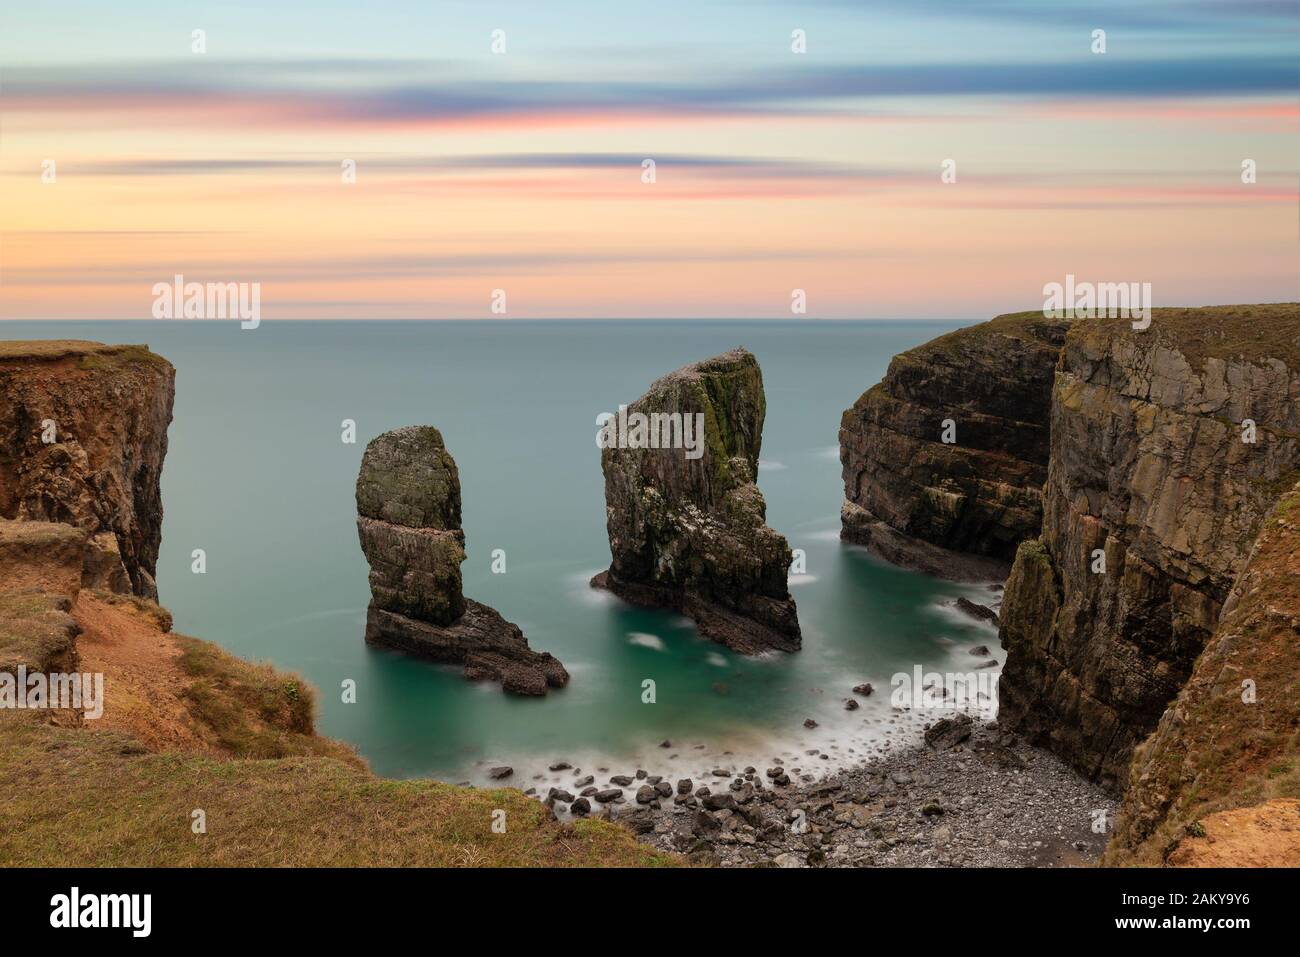 Epic landscape image of Elegug Stacks in Wales long exposure during stunning colorful sunset Stock Photo